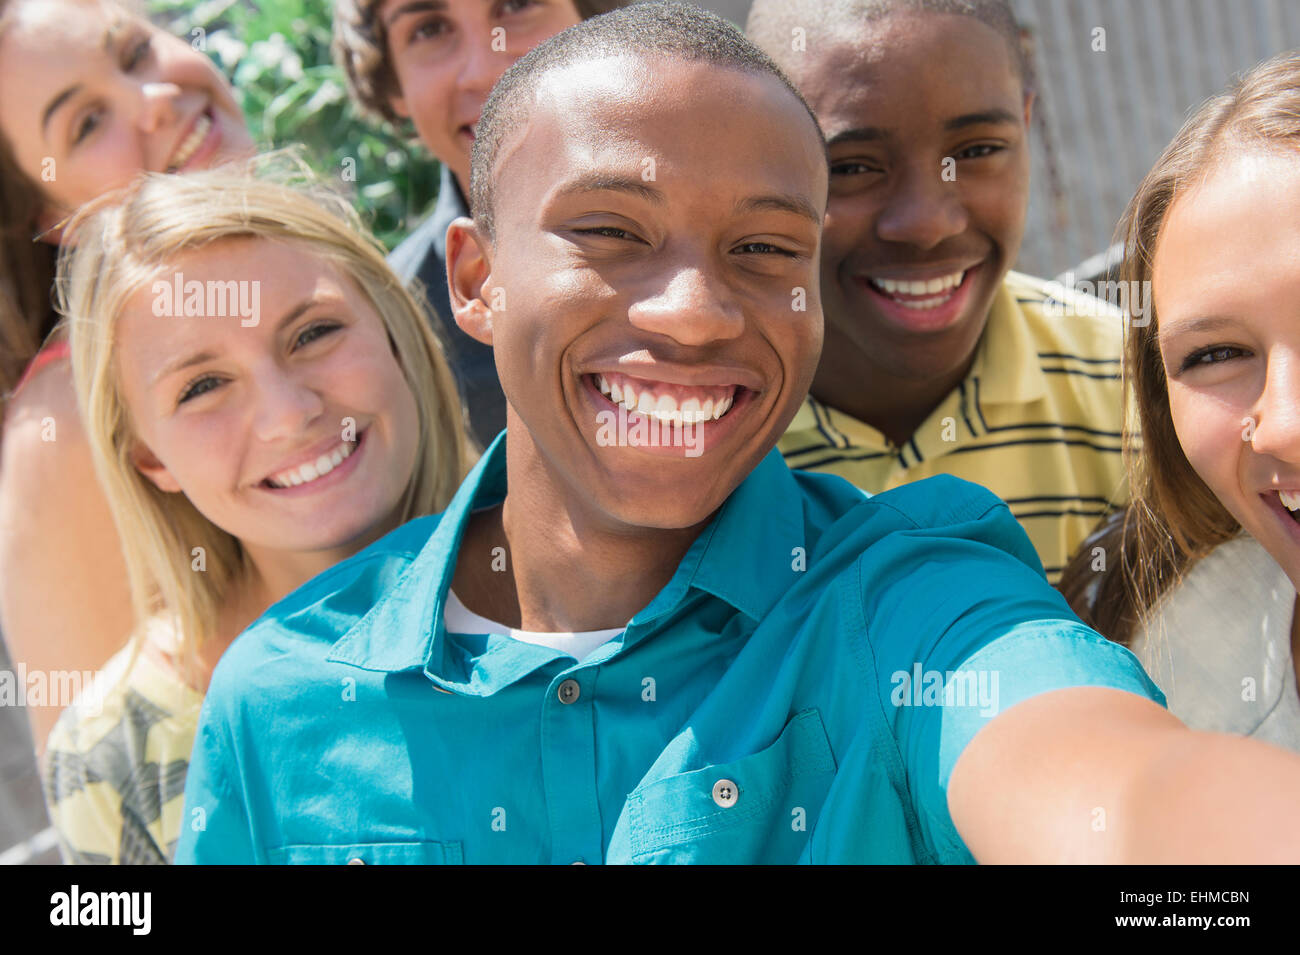 Teenagers taking selfie together outdoors Stock Photo